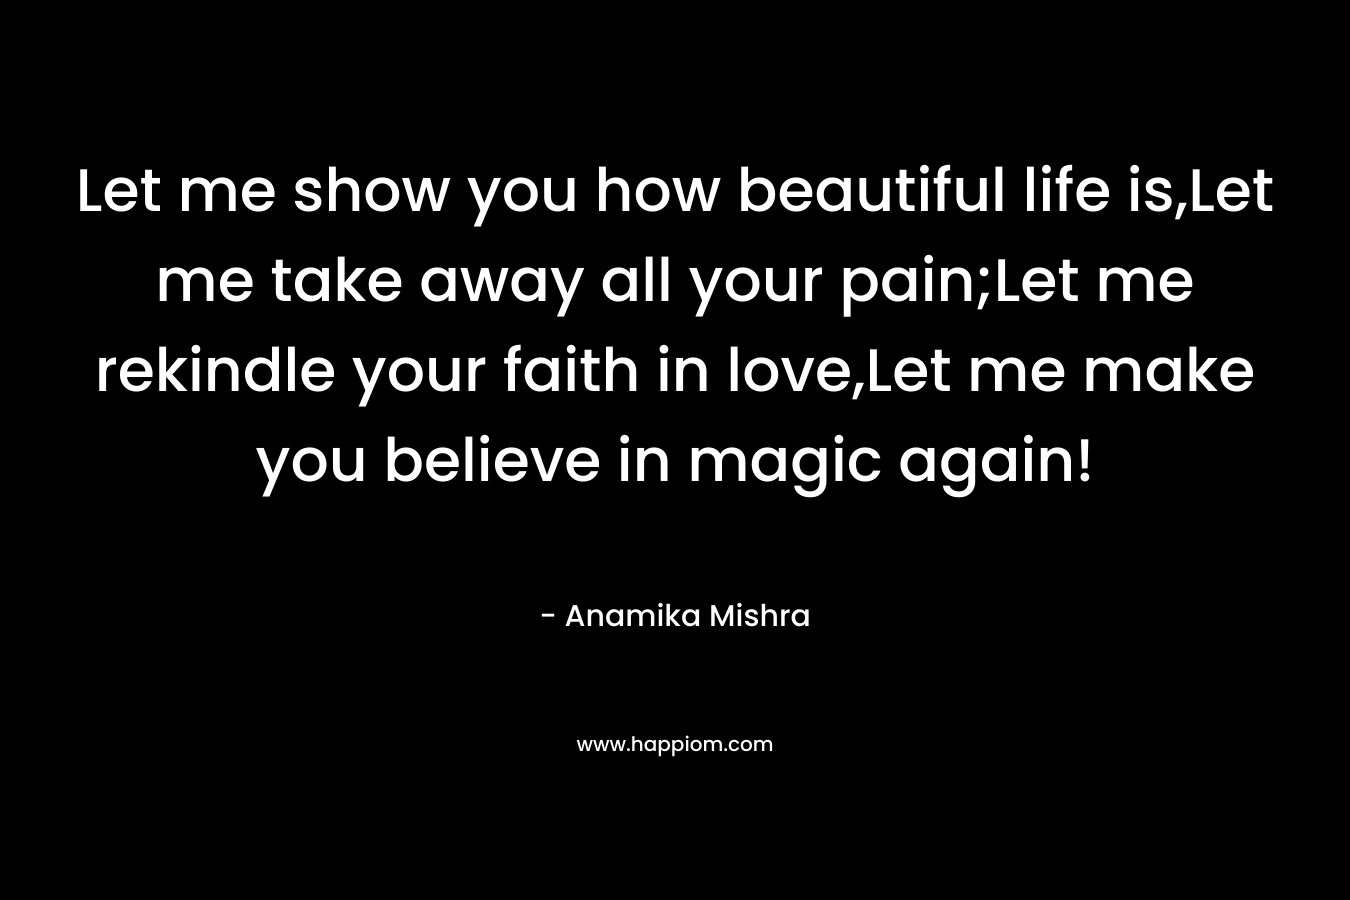 Let me show you how beautiful life is,Let me take away all your pain;Let me rekindle your faith in love,Let me make you believe in magic again! – Anamika Mishra